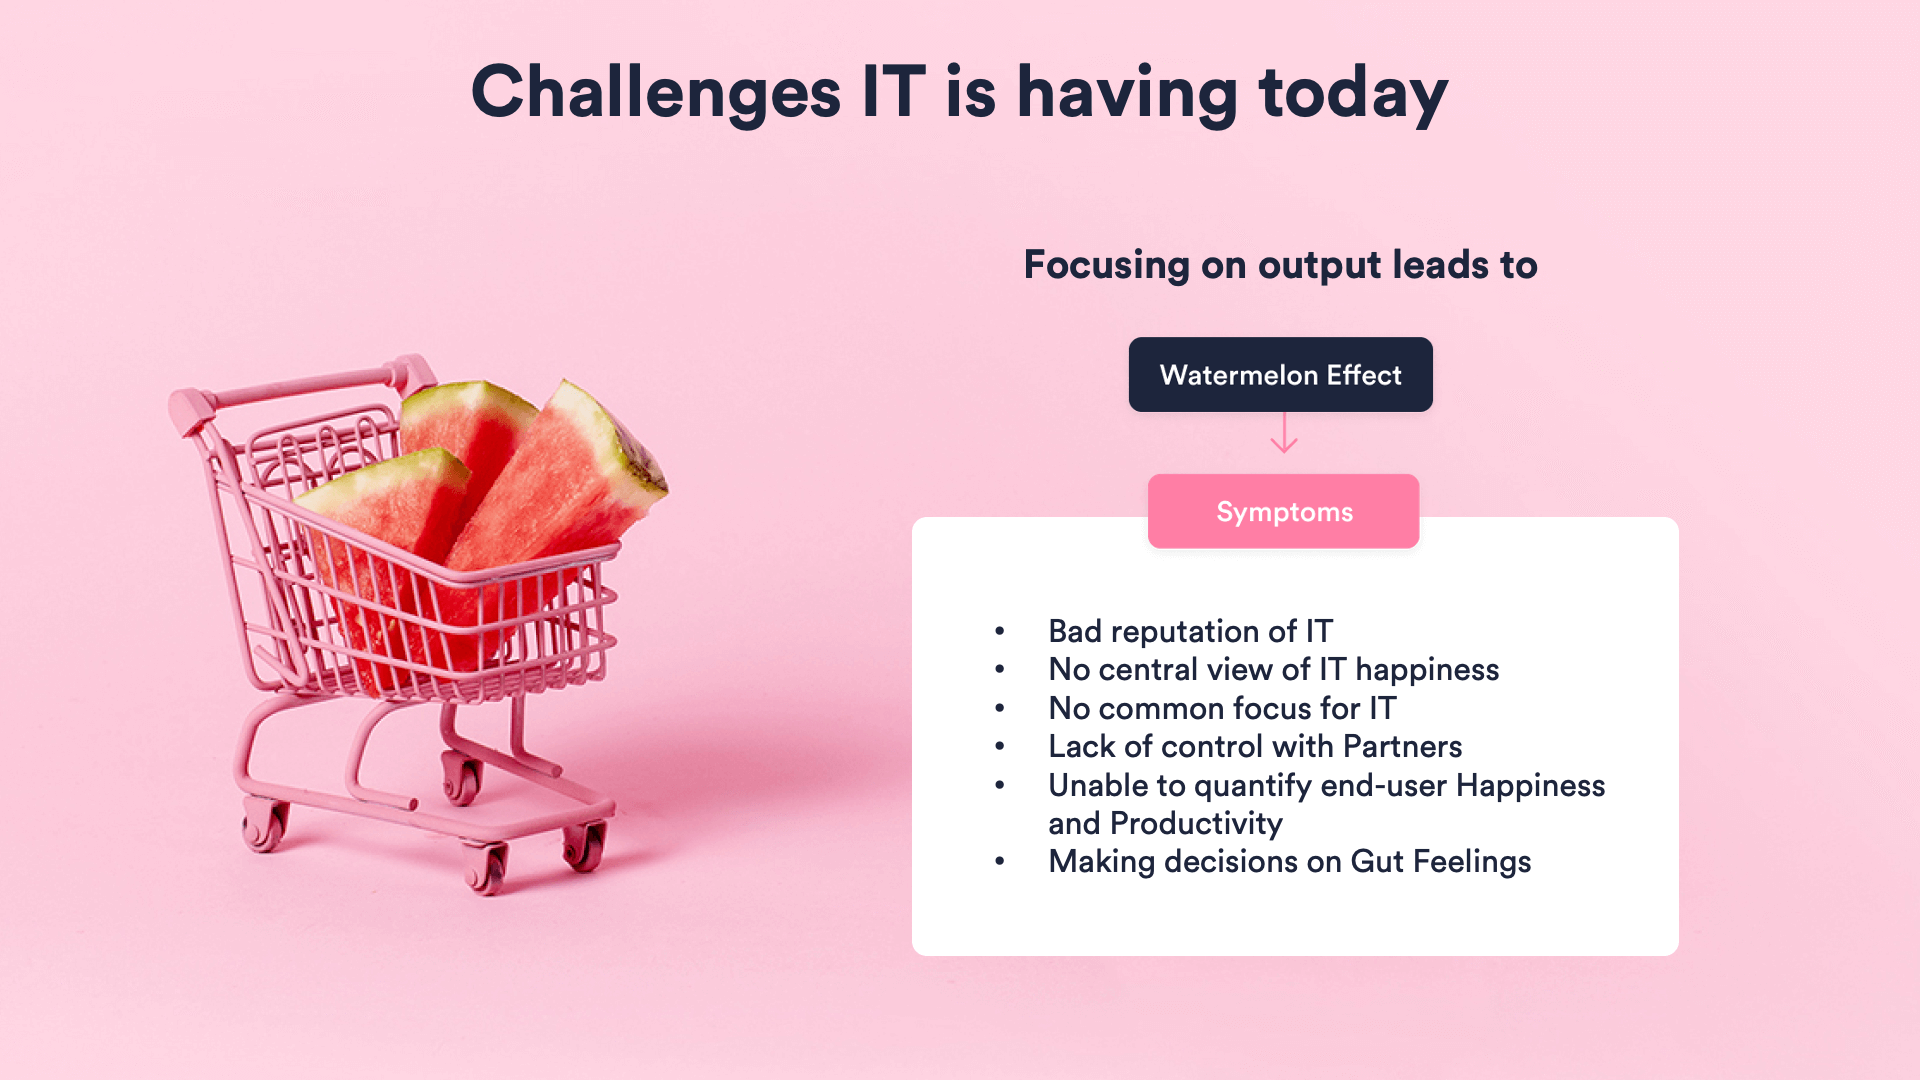 Typical IT challenges caused by Watermelon effect